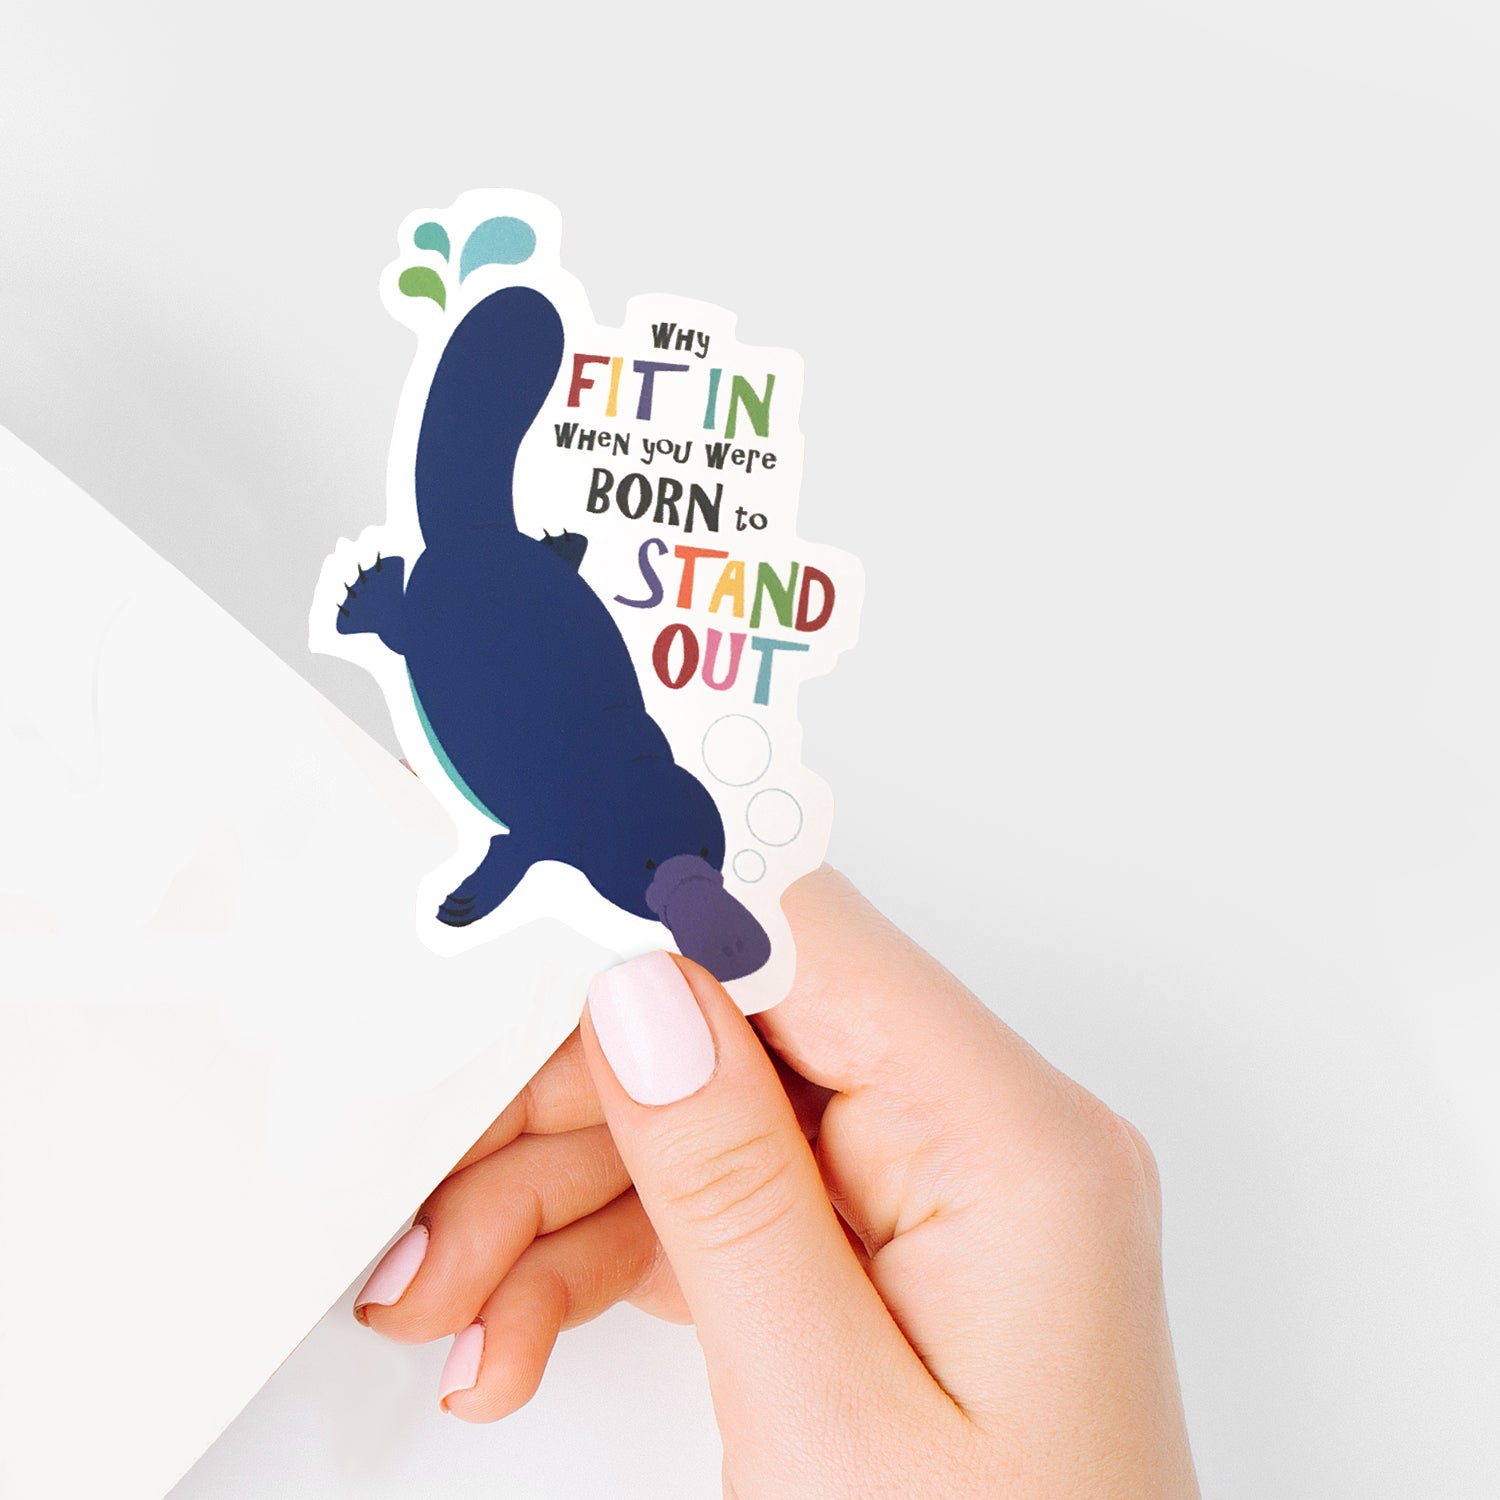 hand holding platypus sticker with Why fit in when you were born to stand out.